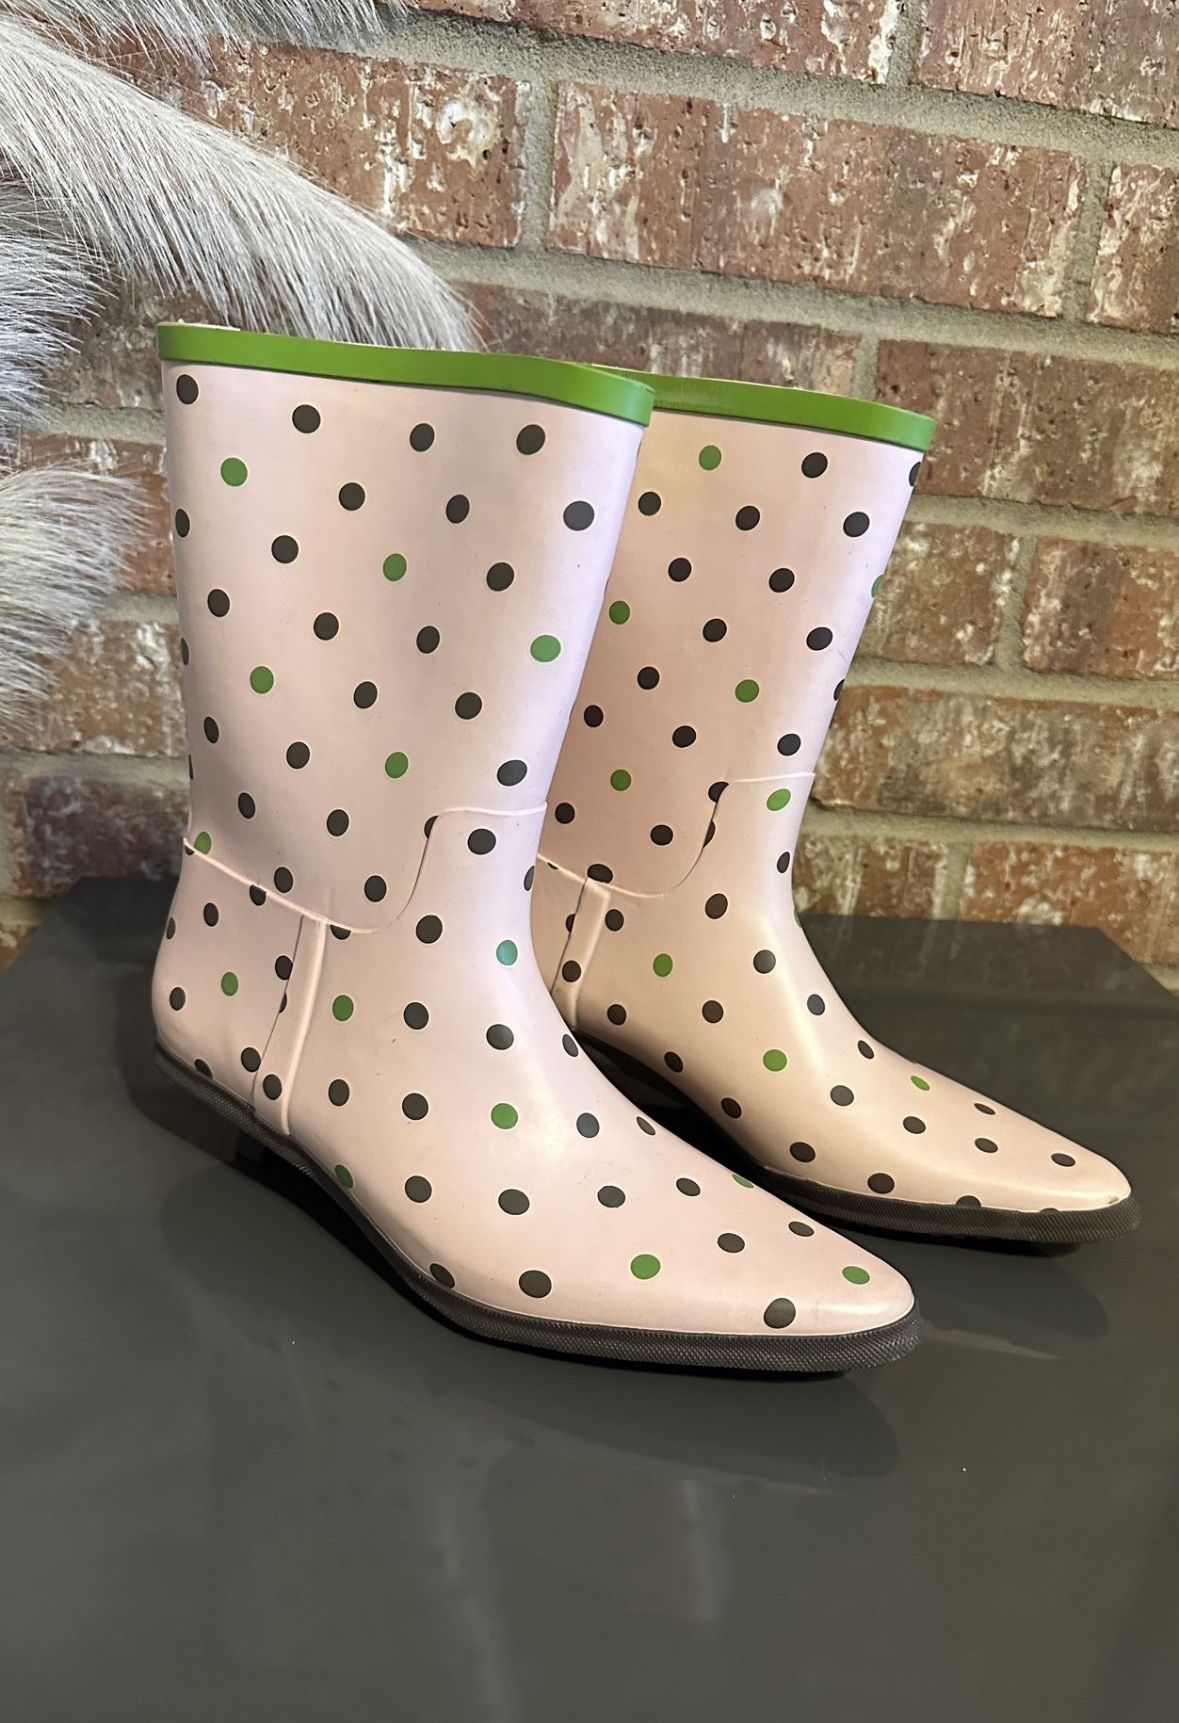 Paul Smith Rubber Heel Boots Polka Dot Rain Boots Size 7 Pink Pointy Toe